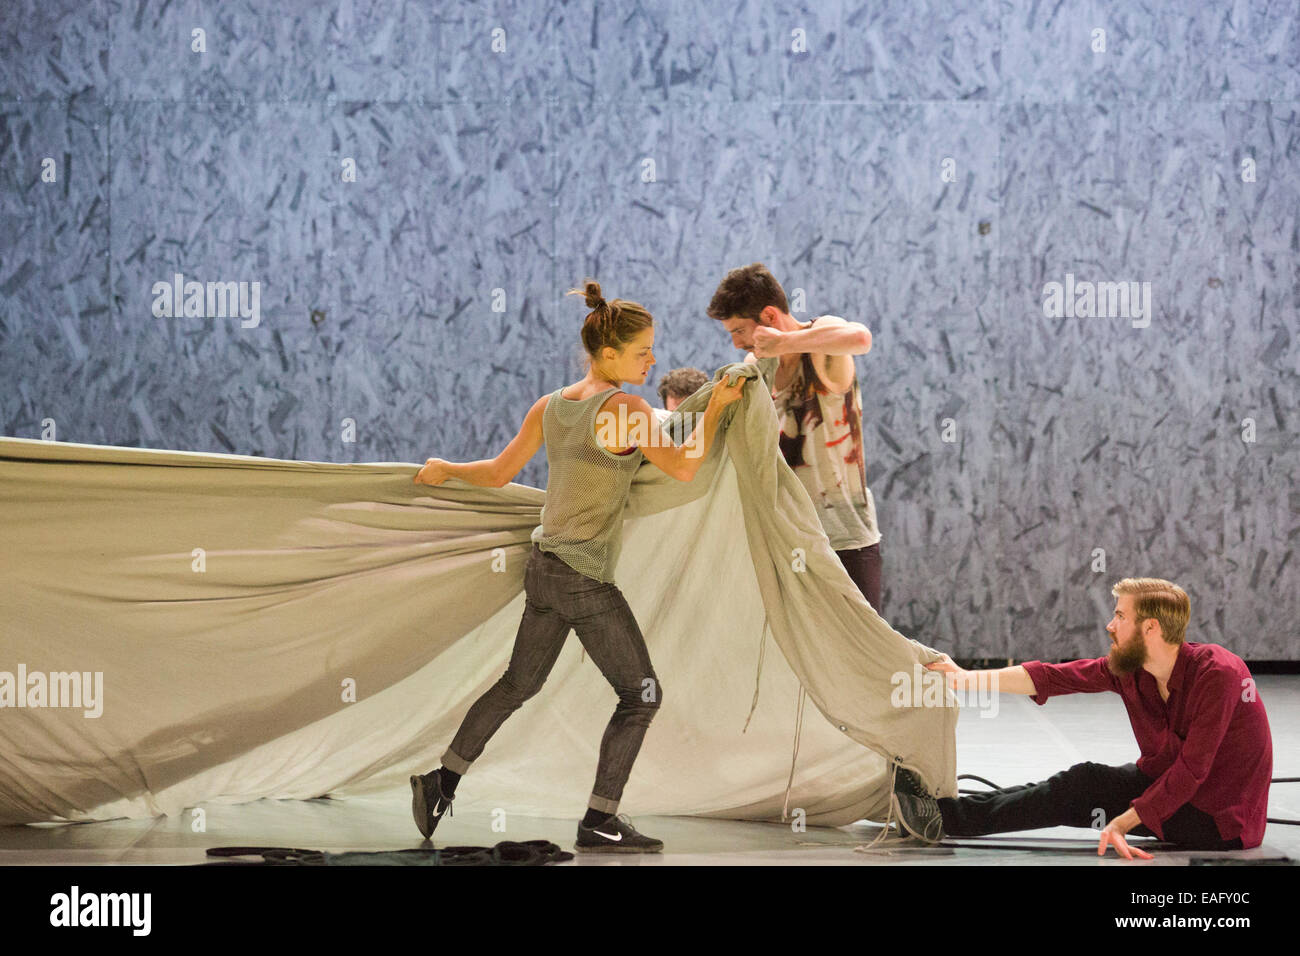 Cullberg Ballet Plateau at Sadler's Wells Theatre as part of the Northern Light season Stock Photo - Alamy